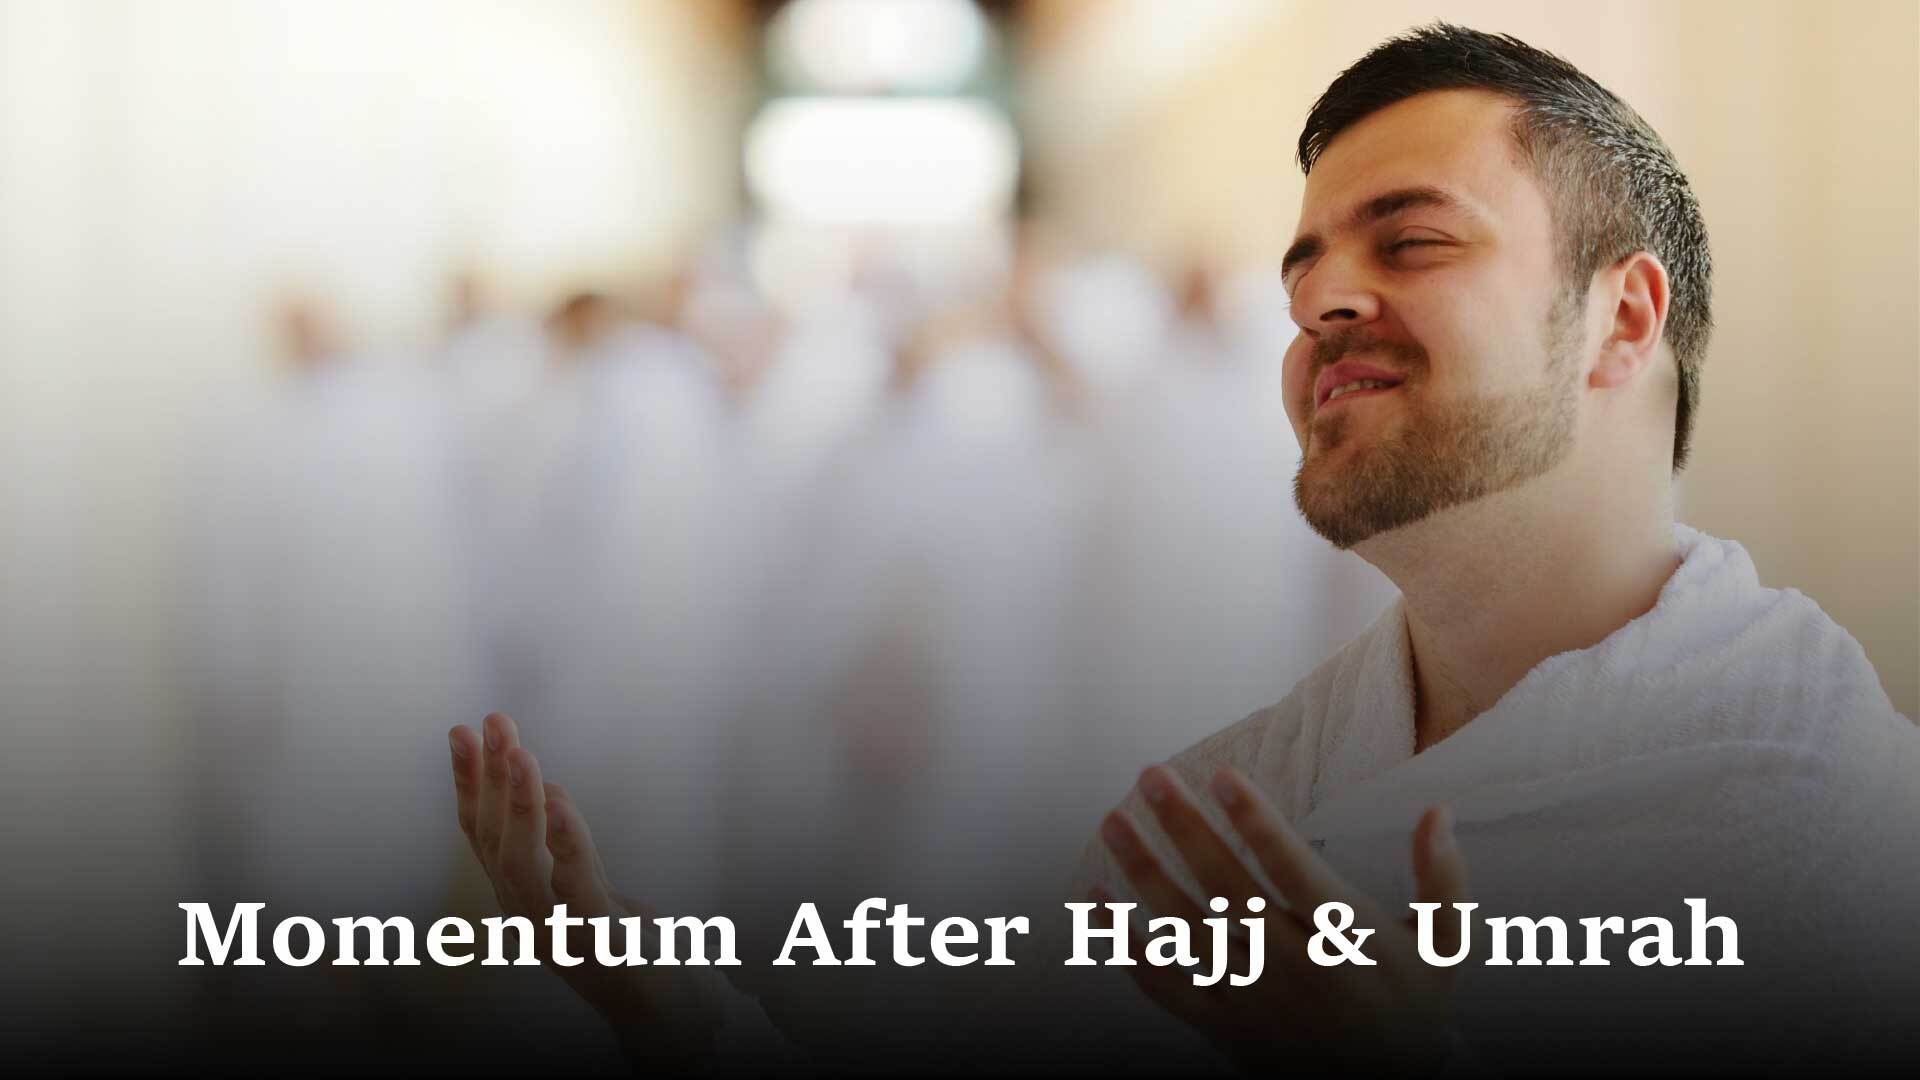 How to Improve momentum after Hajj or Umrah